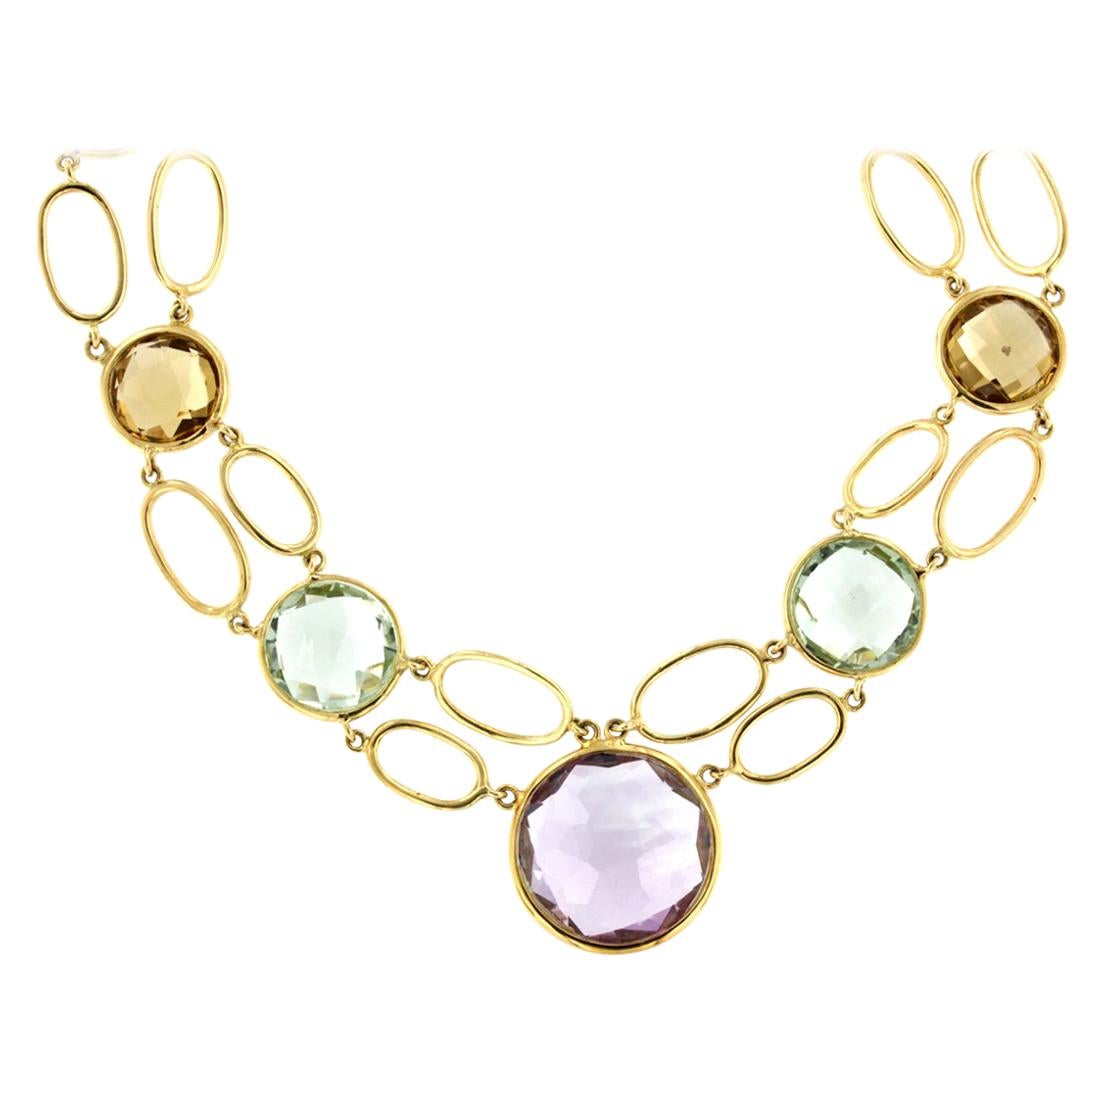 18k Yellow Gold with Colored Stones Bracelet and Necklace Set For Sale